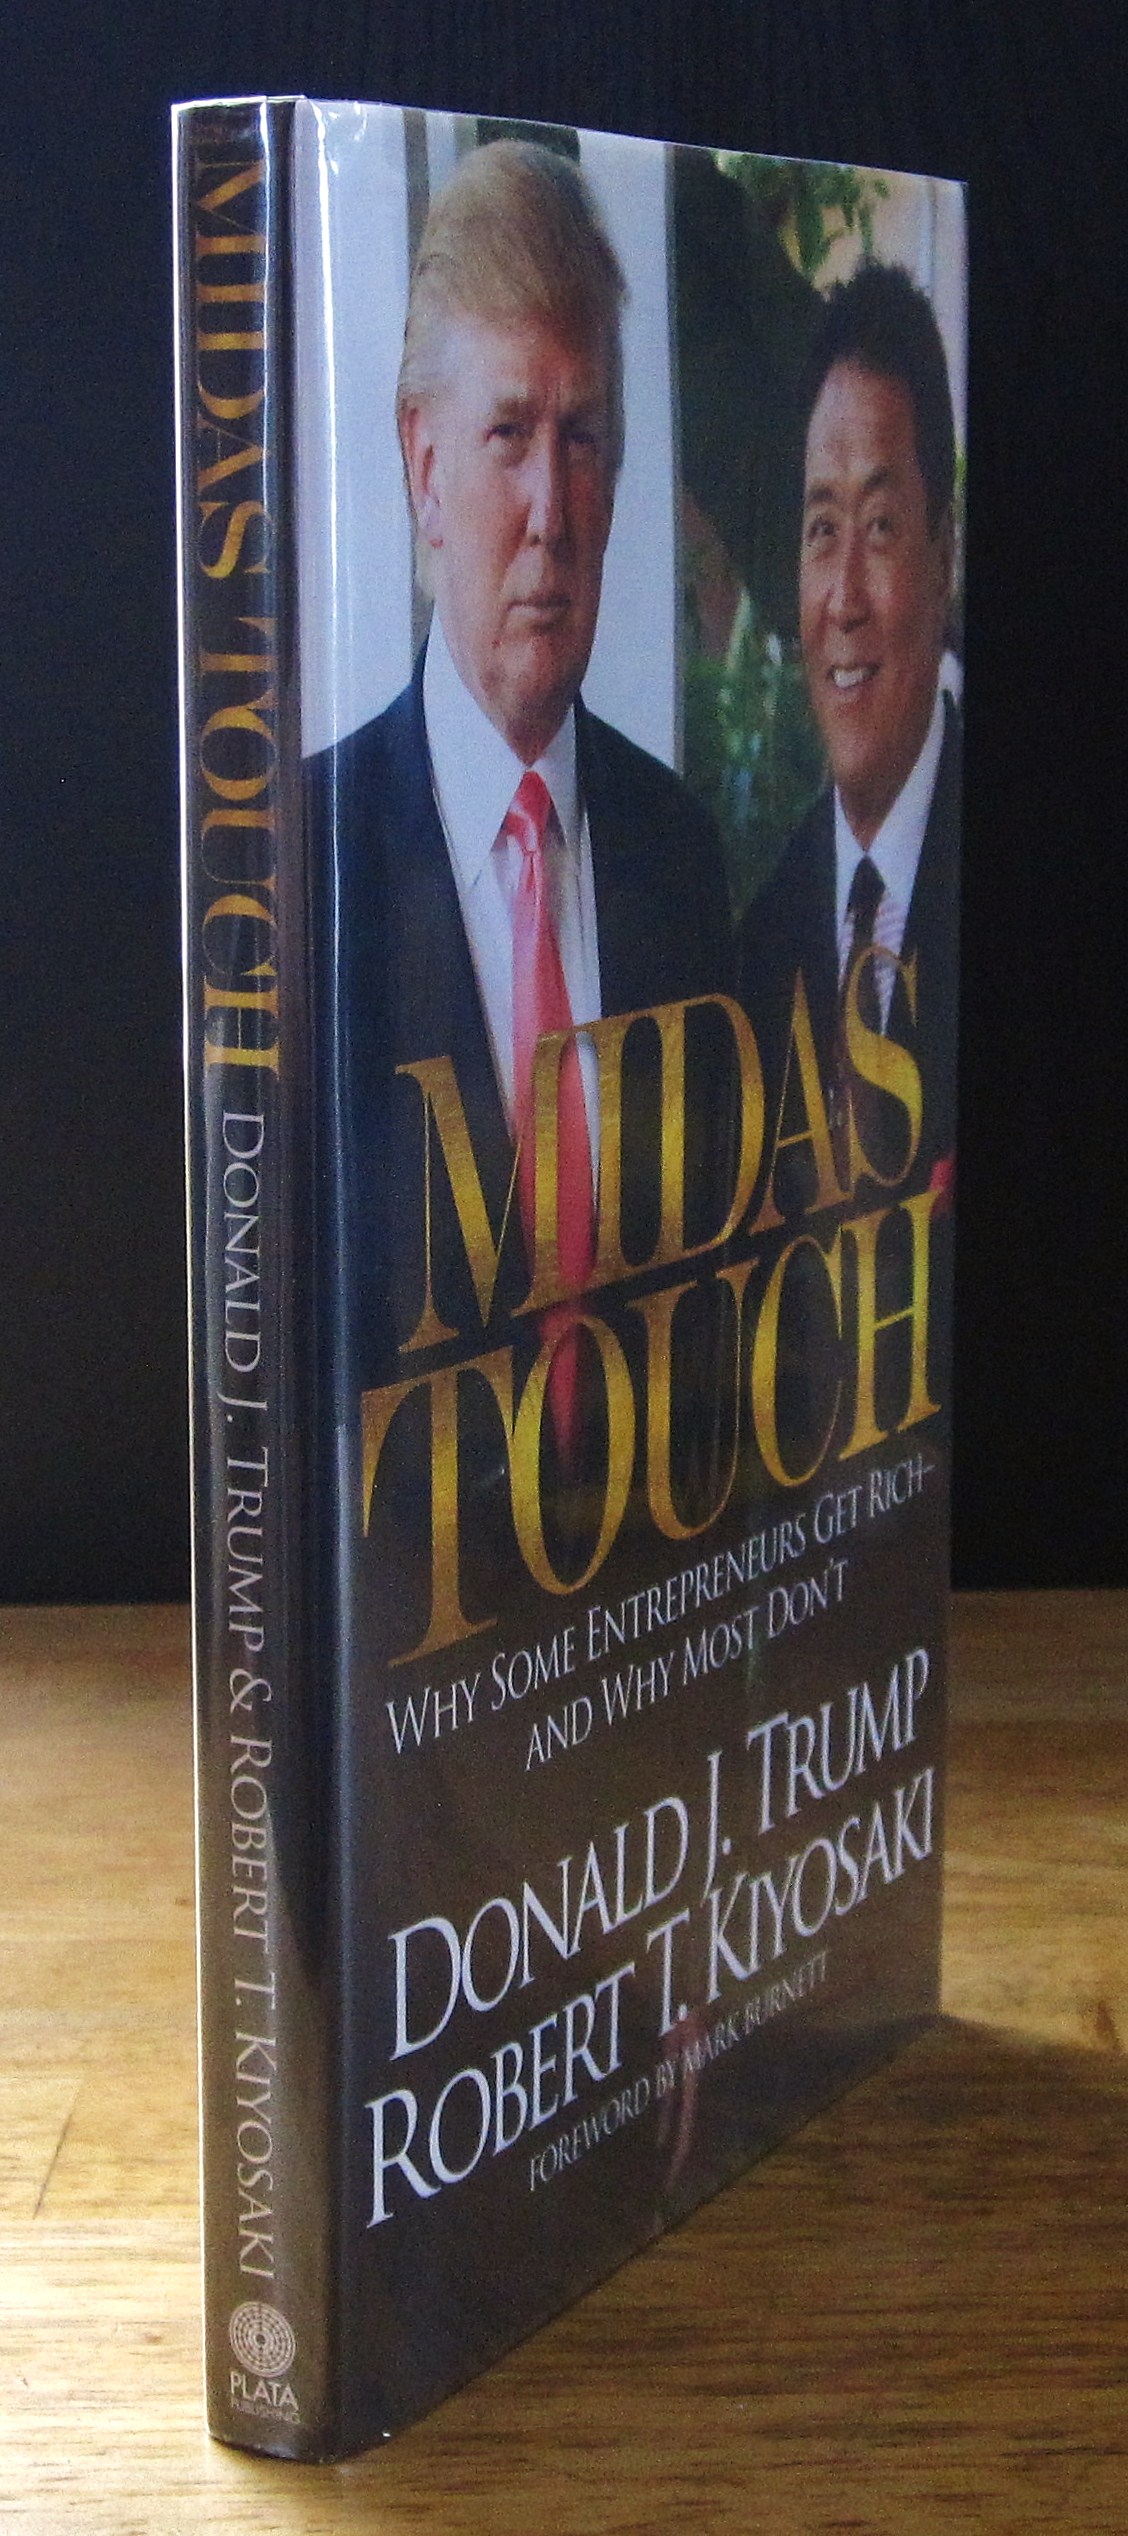 Midas Touch: Why Some Entrepreneurs Get Rich And Why Most Don'T